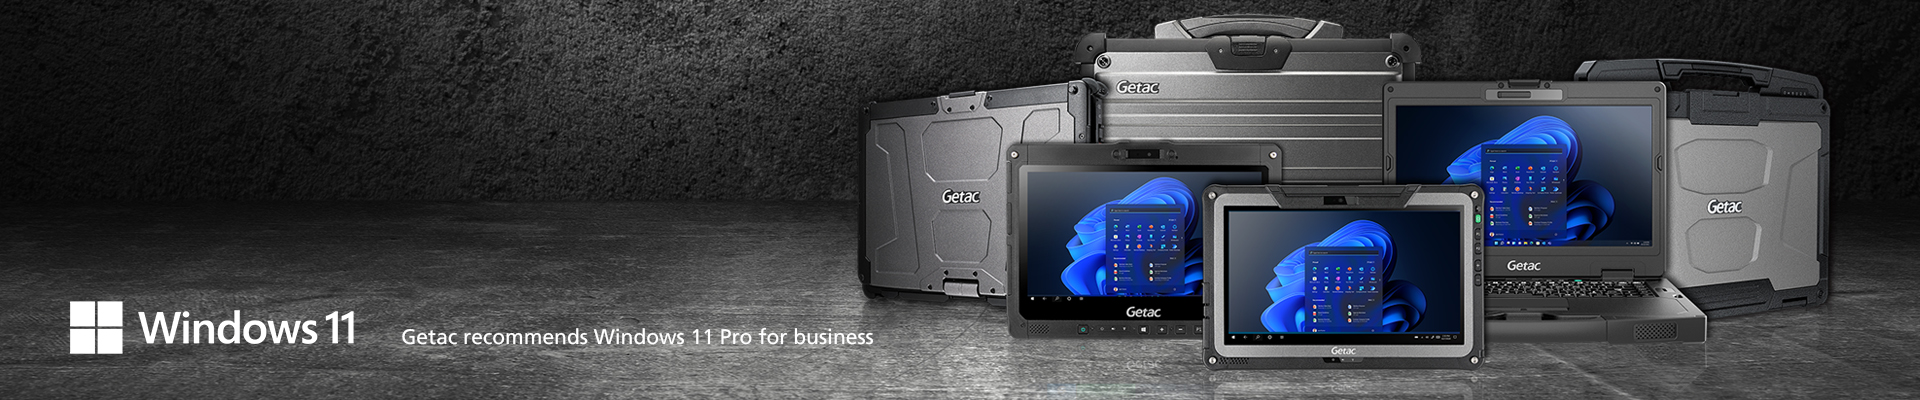 Getac reccomends Windows 11 Pro for business